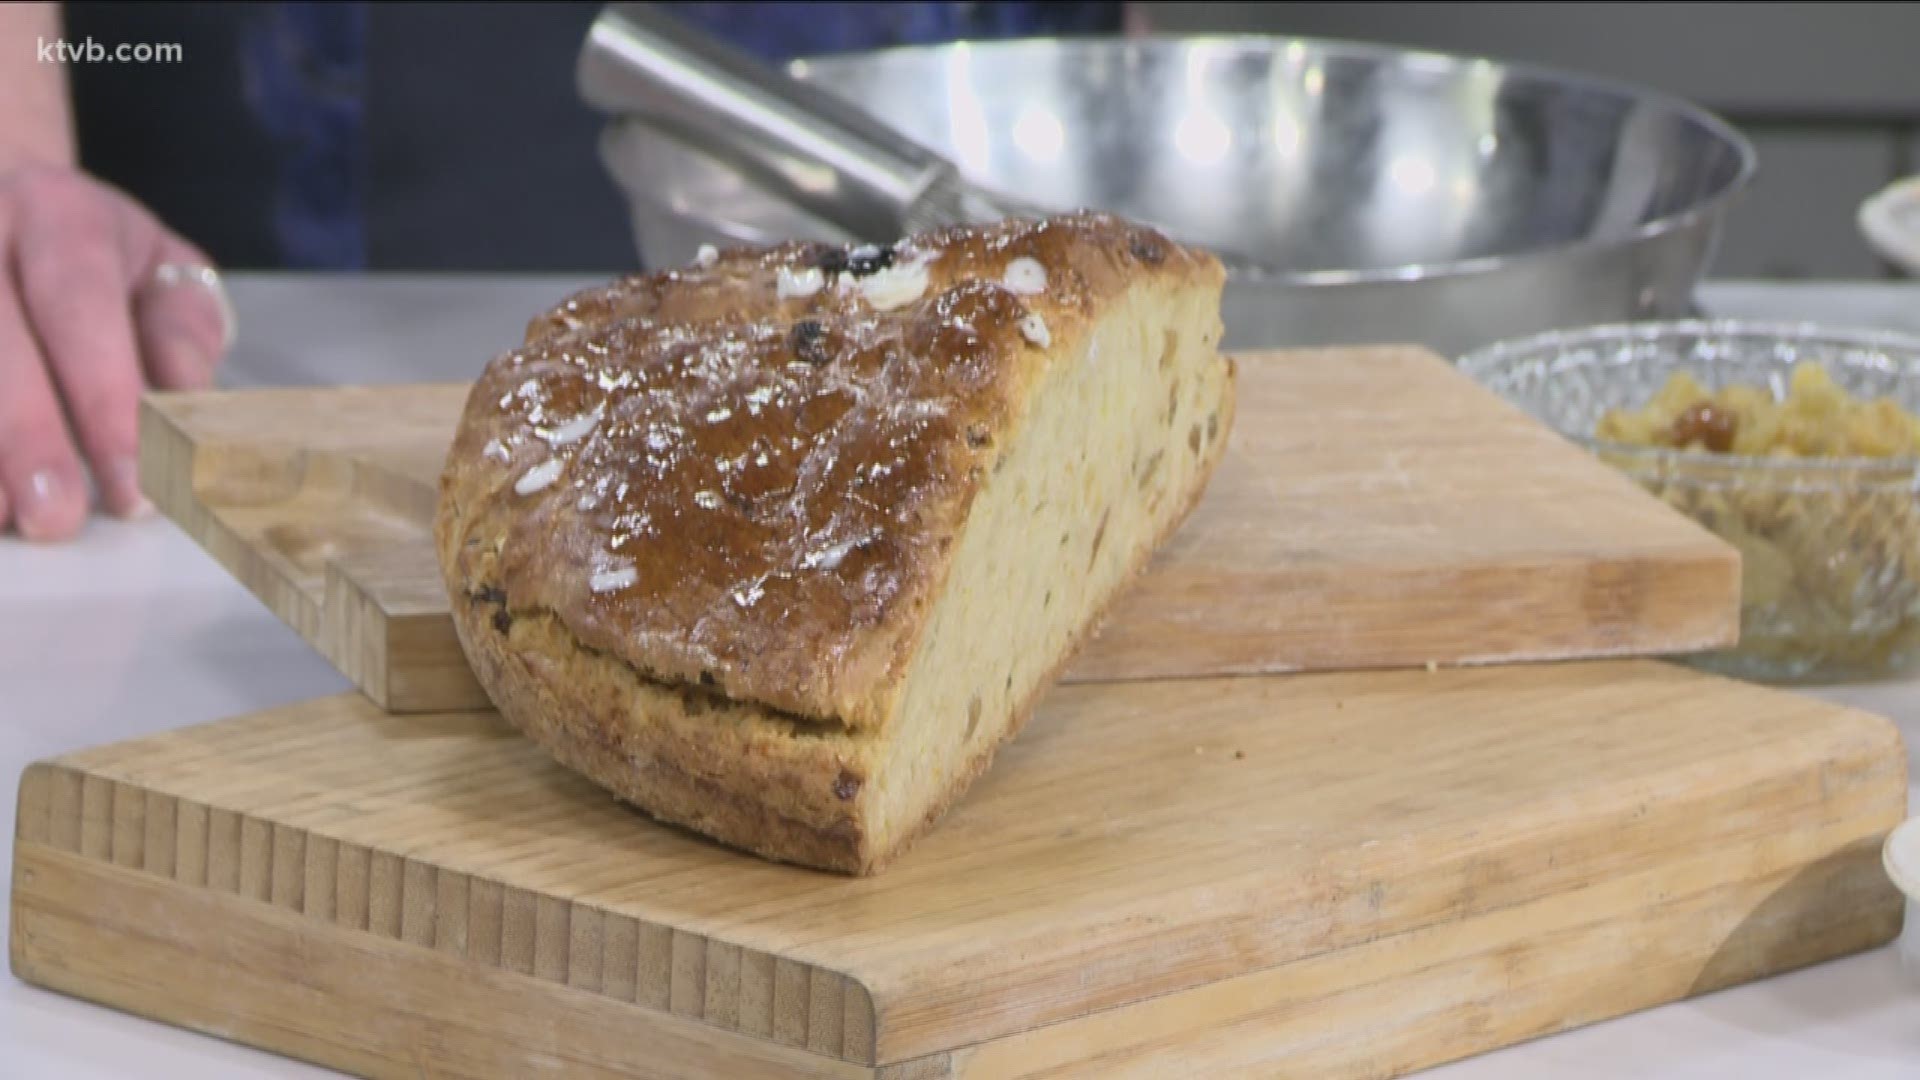 Chef Lou Aaron helps us get ready for St. Patrick's Day with this bread infused with Irish whiskey.